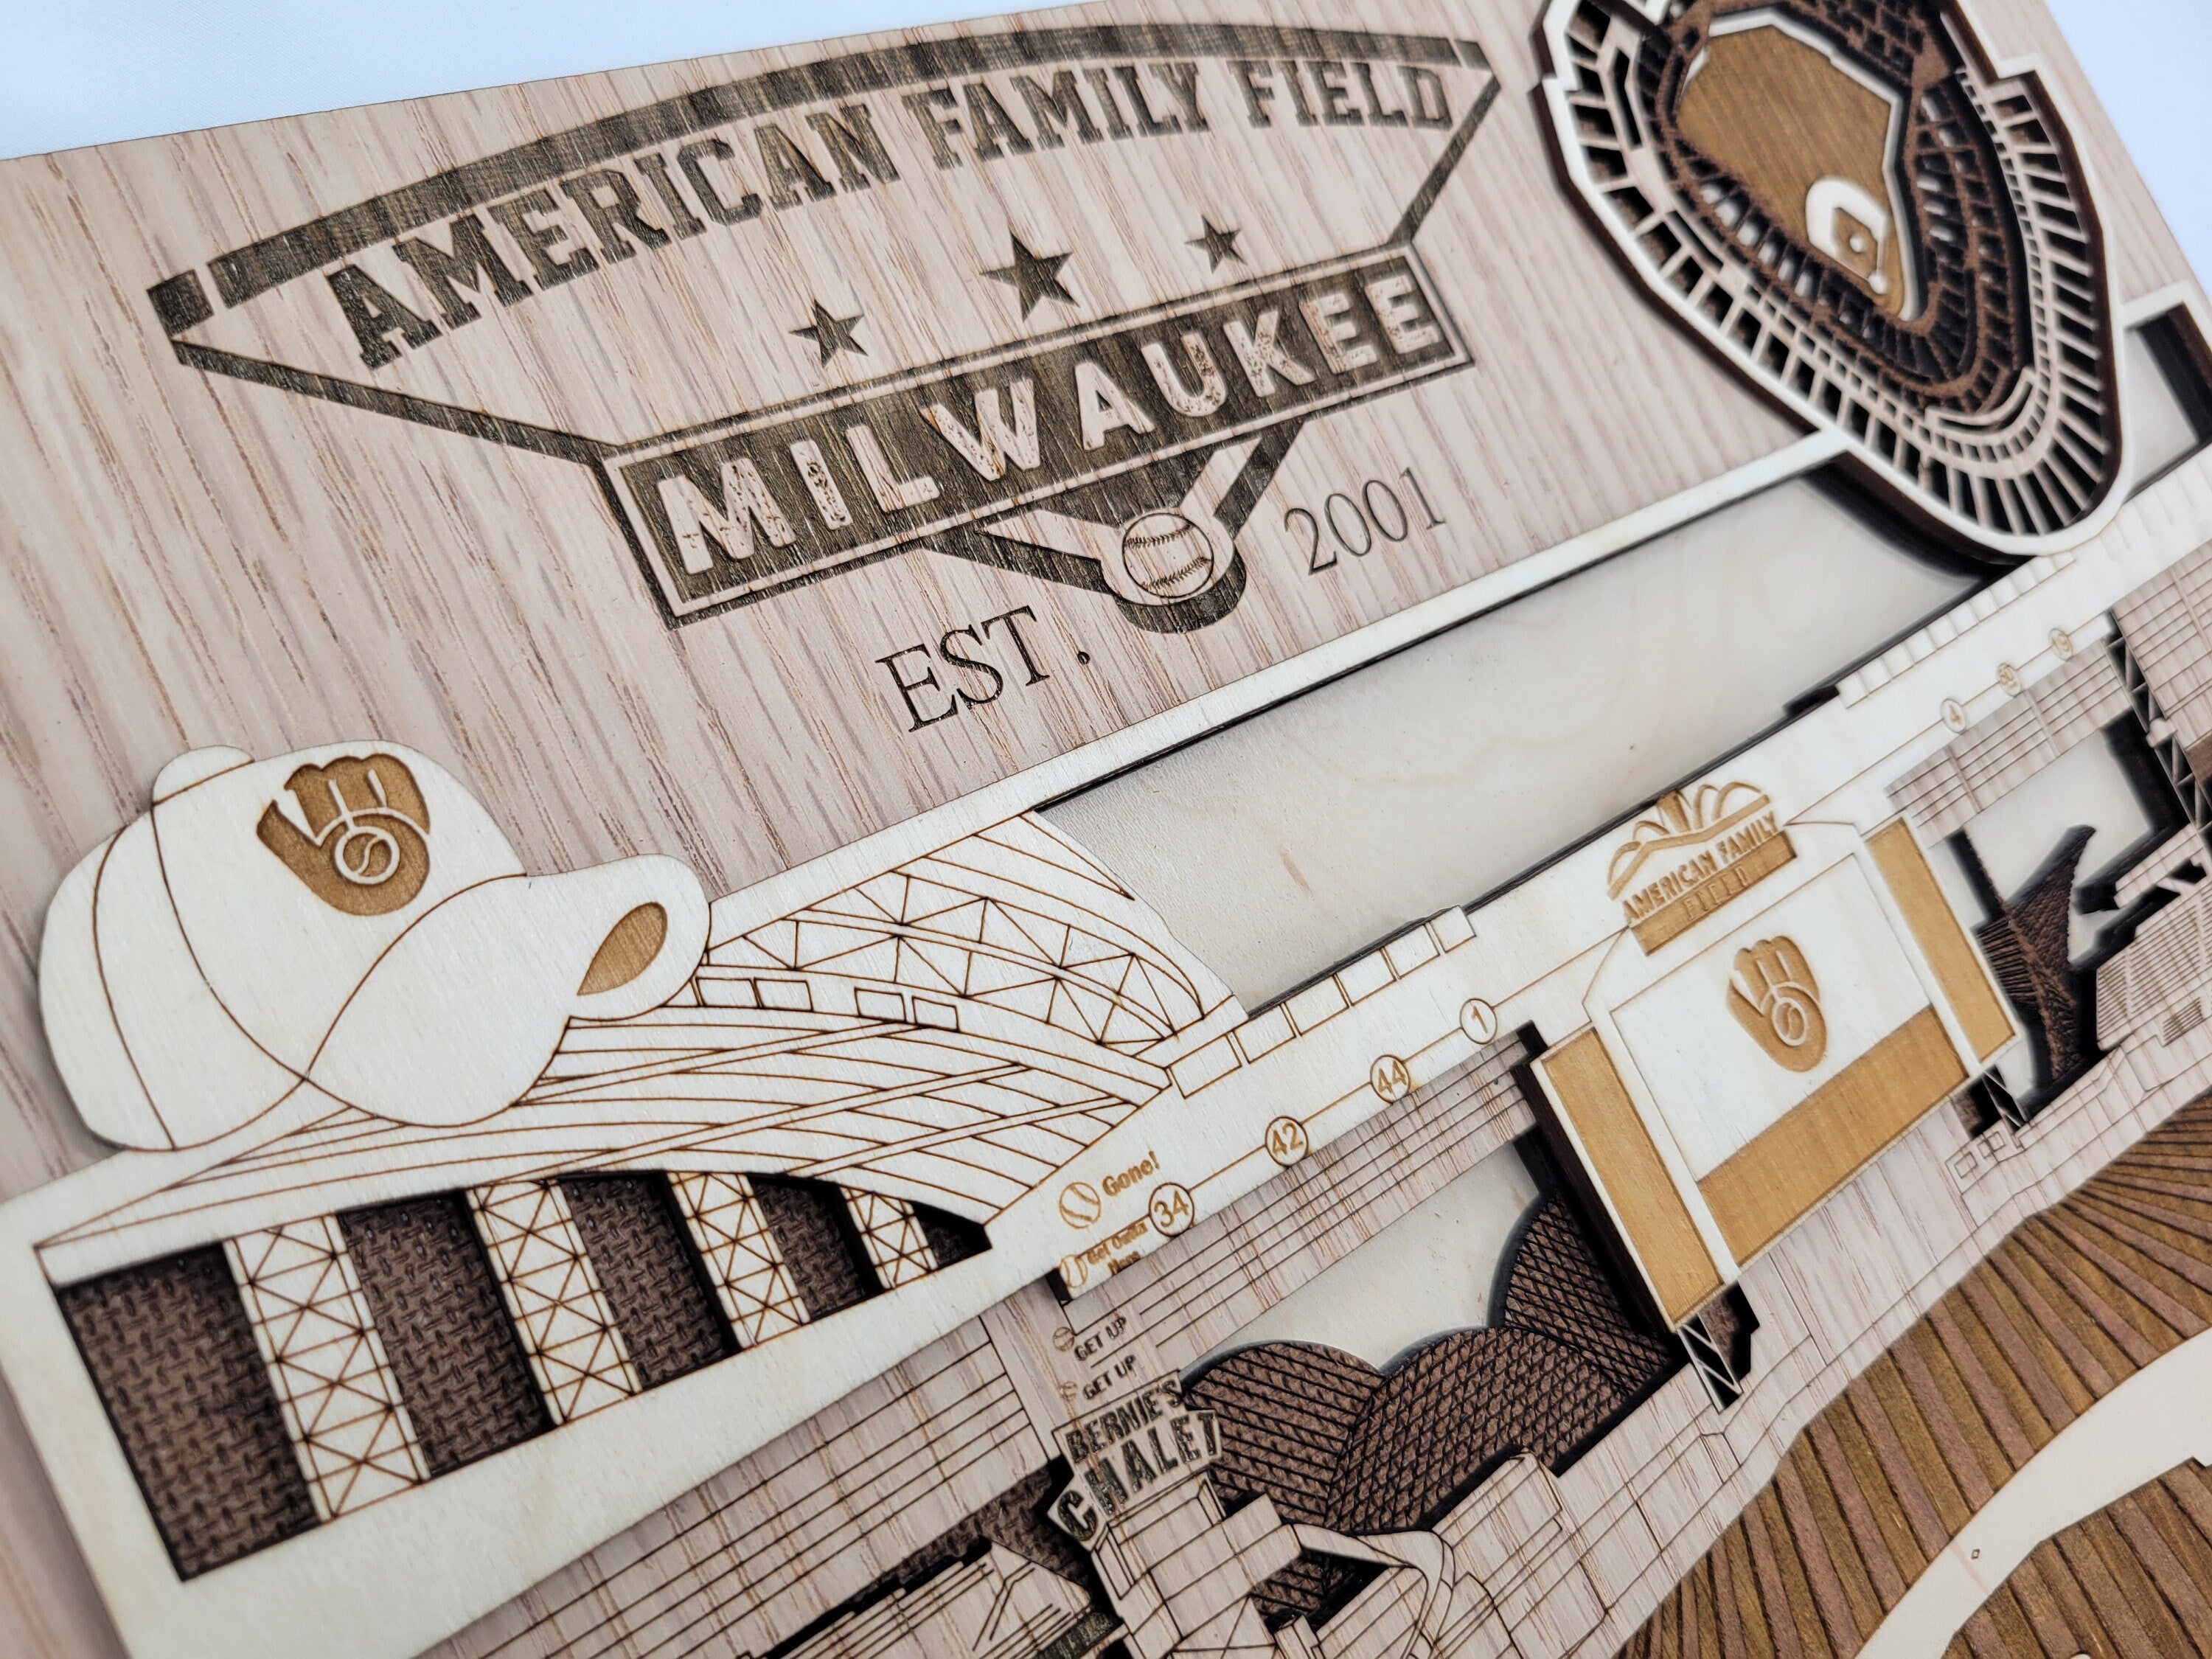 American Family Field - Home of the Milwaukee Brewers